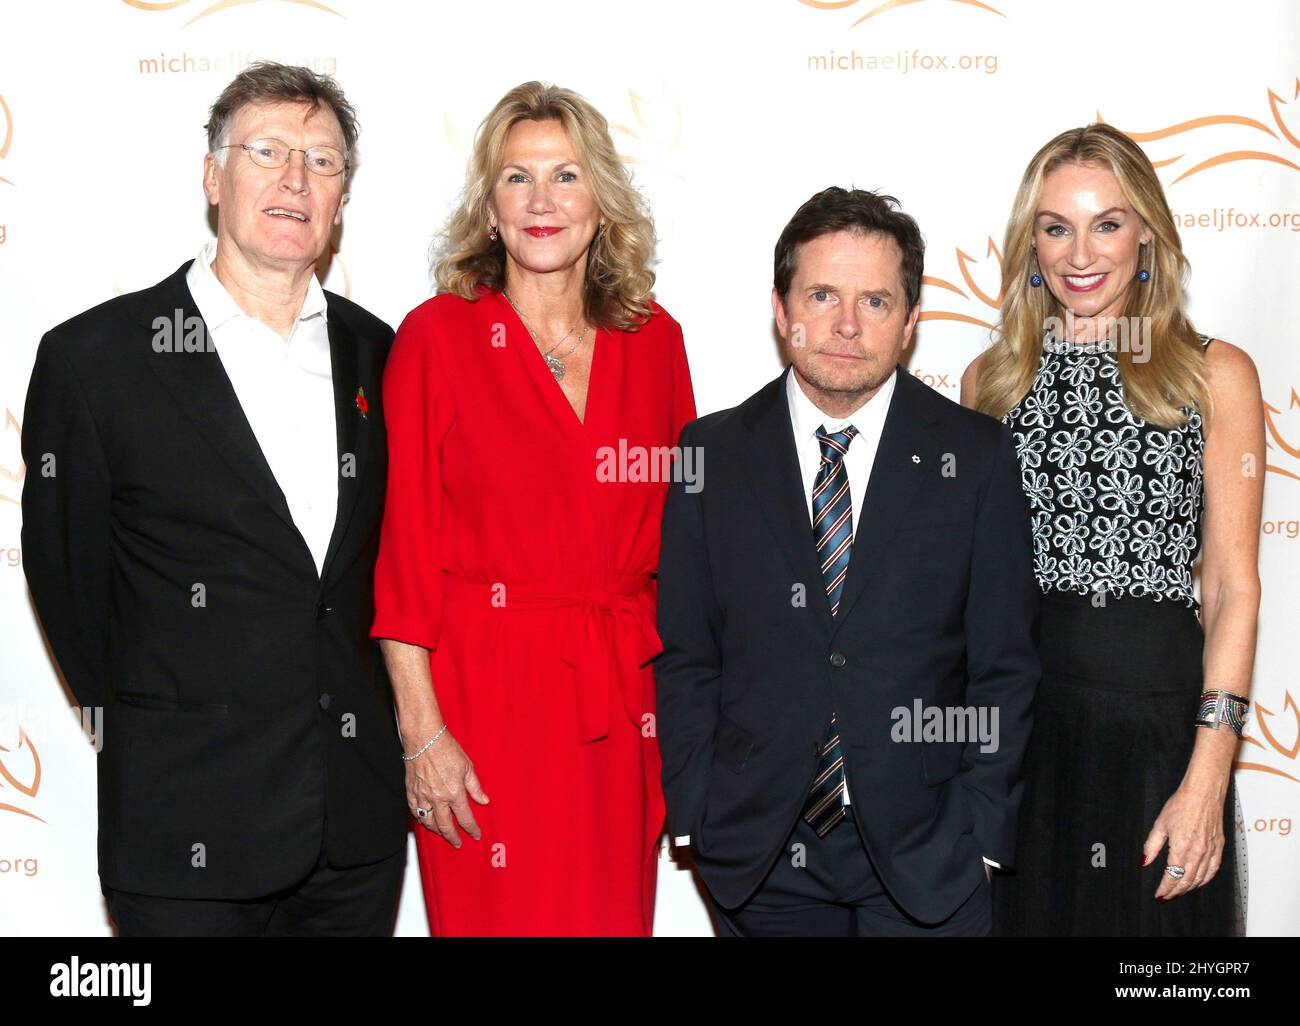 Steve Winwood, wife Eugenia Winwood, Michael J. Fox & Tracy Pollan at A Funny Thing Happened on the Way to Cure Parkinson's held at the Hilton New York on November 10, 2018 in New York City, NY Stock Photo